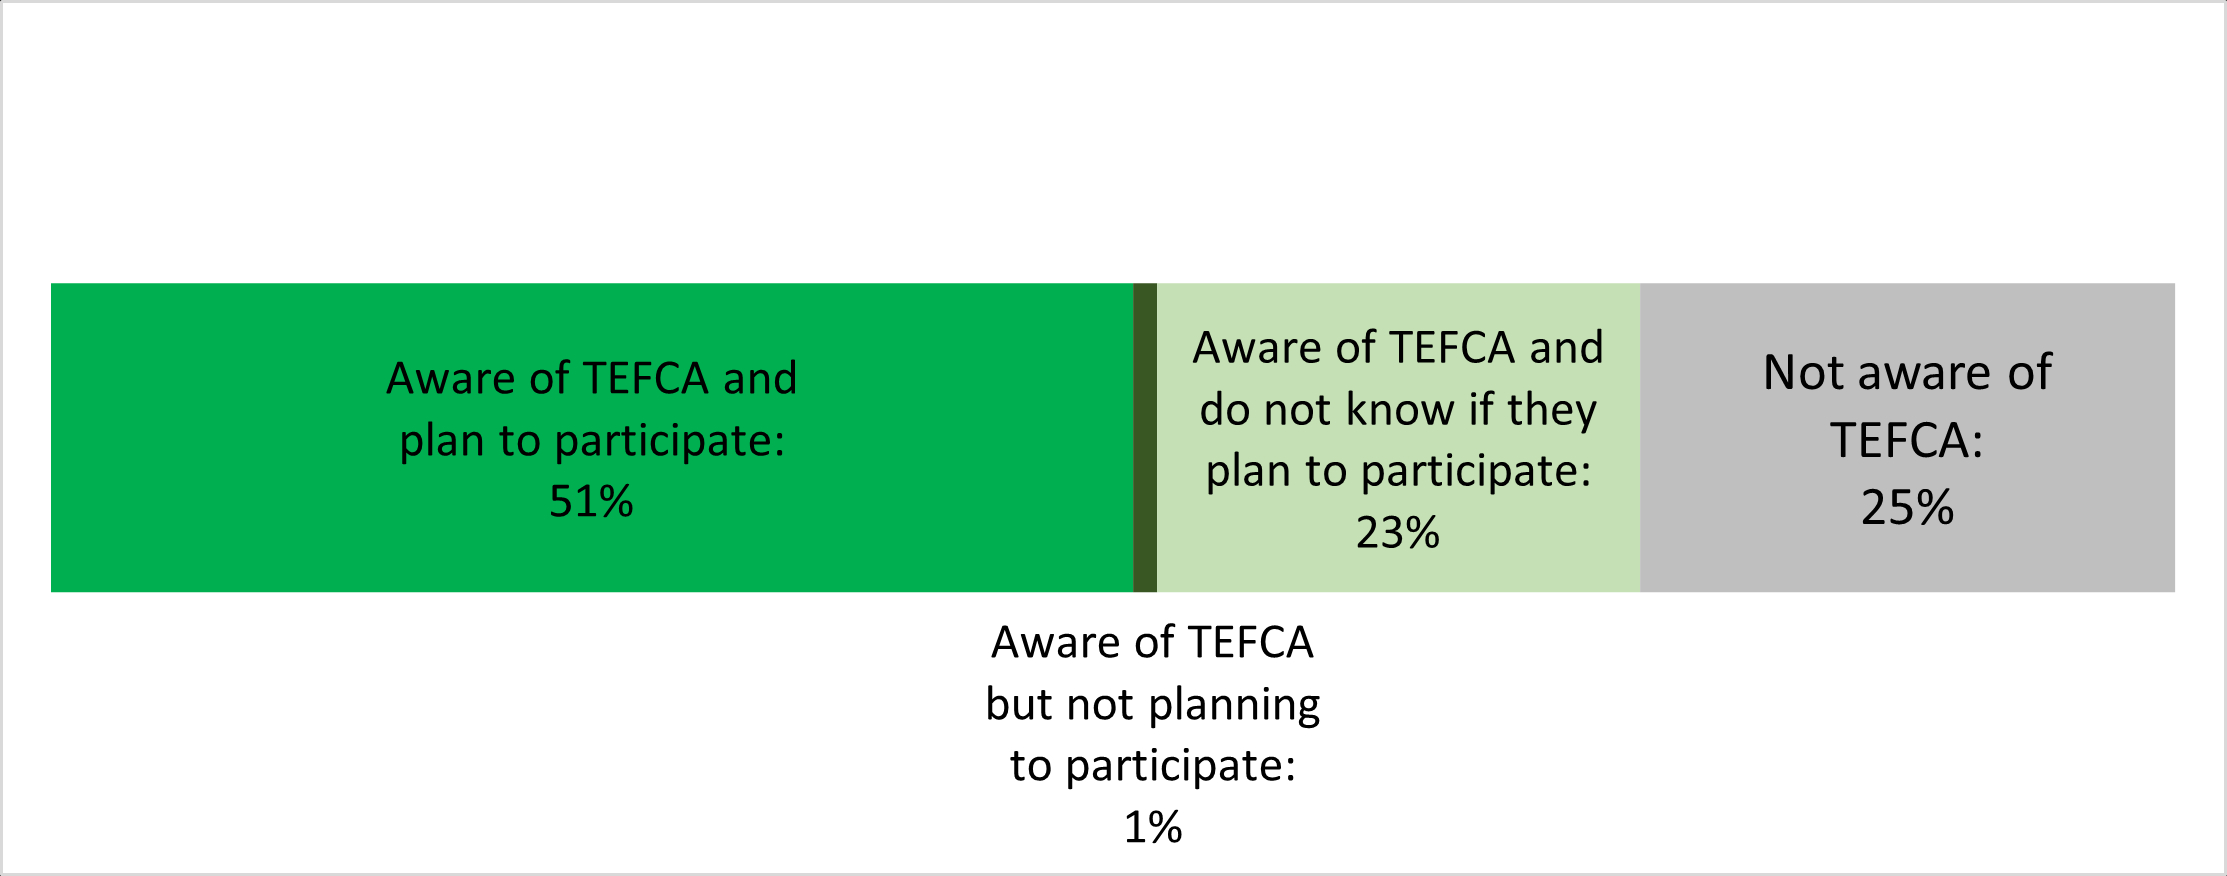 TEFCA Awareness Among Hospitals and Variations Regarding Intent to Participate - Health IT Buzz